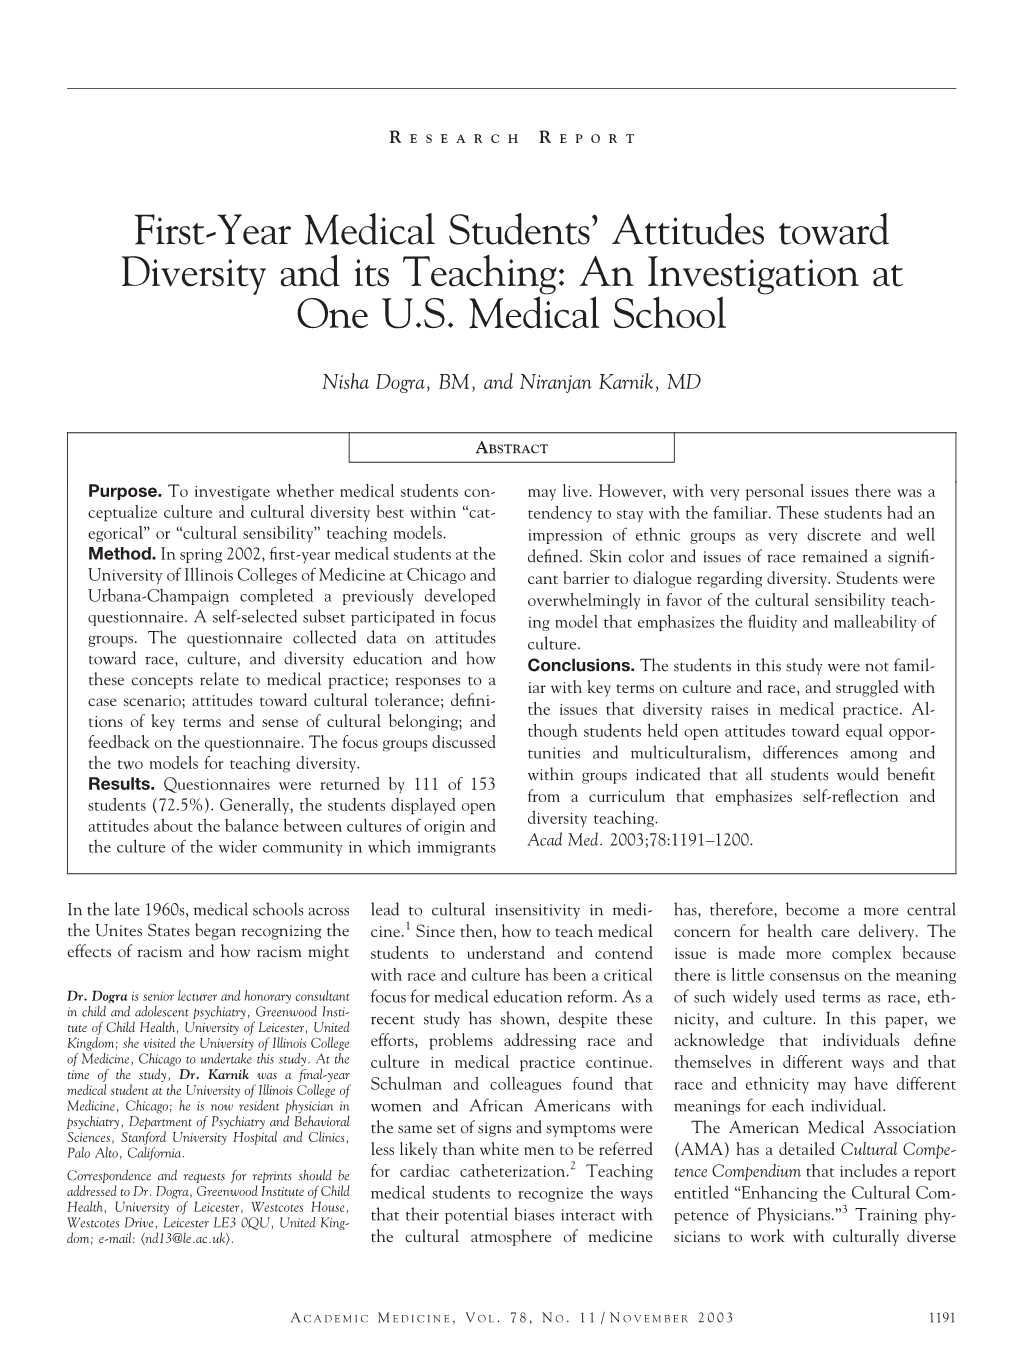 First-Year Medical Students' Attitudes Toward Diversity and Its